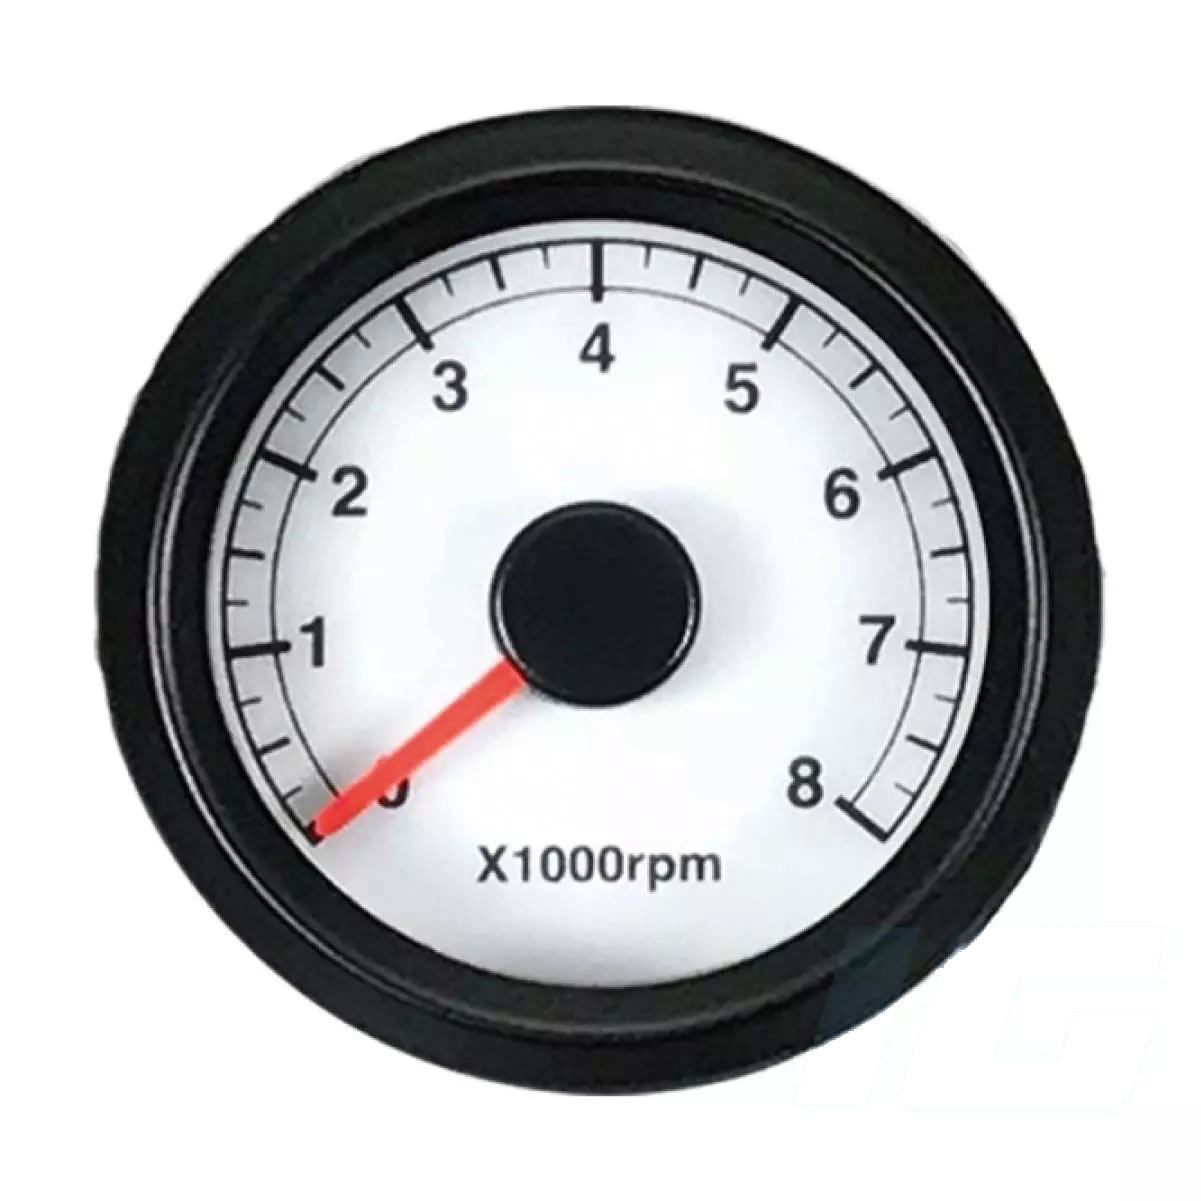 White Face Red Neddle Universal Aftermarket Tachometer for Motorcycle Gauge